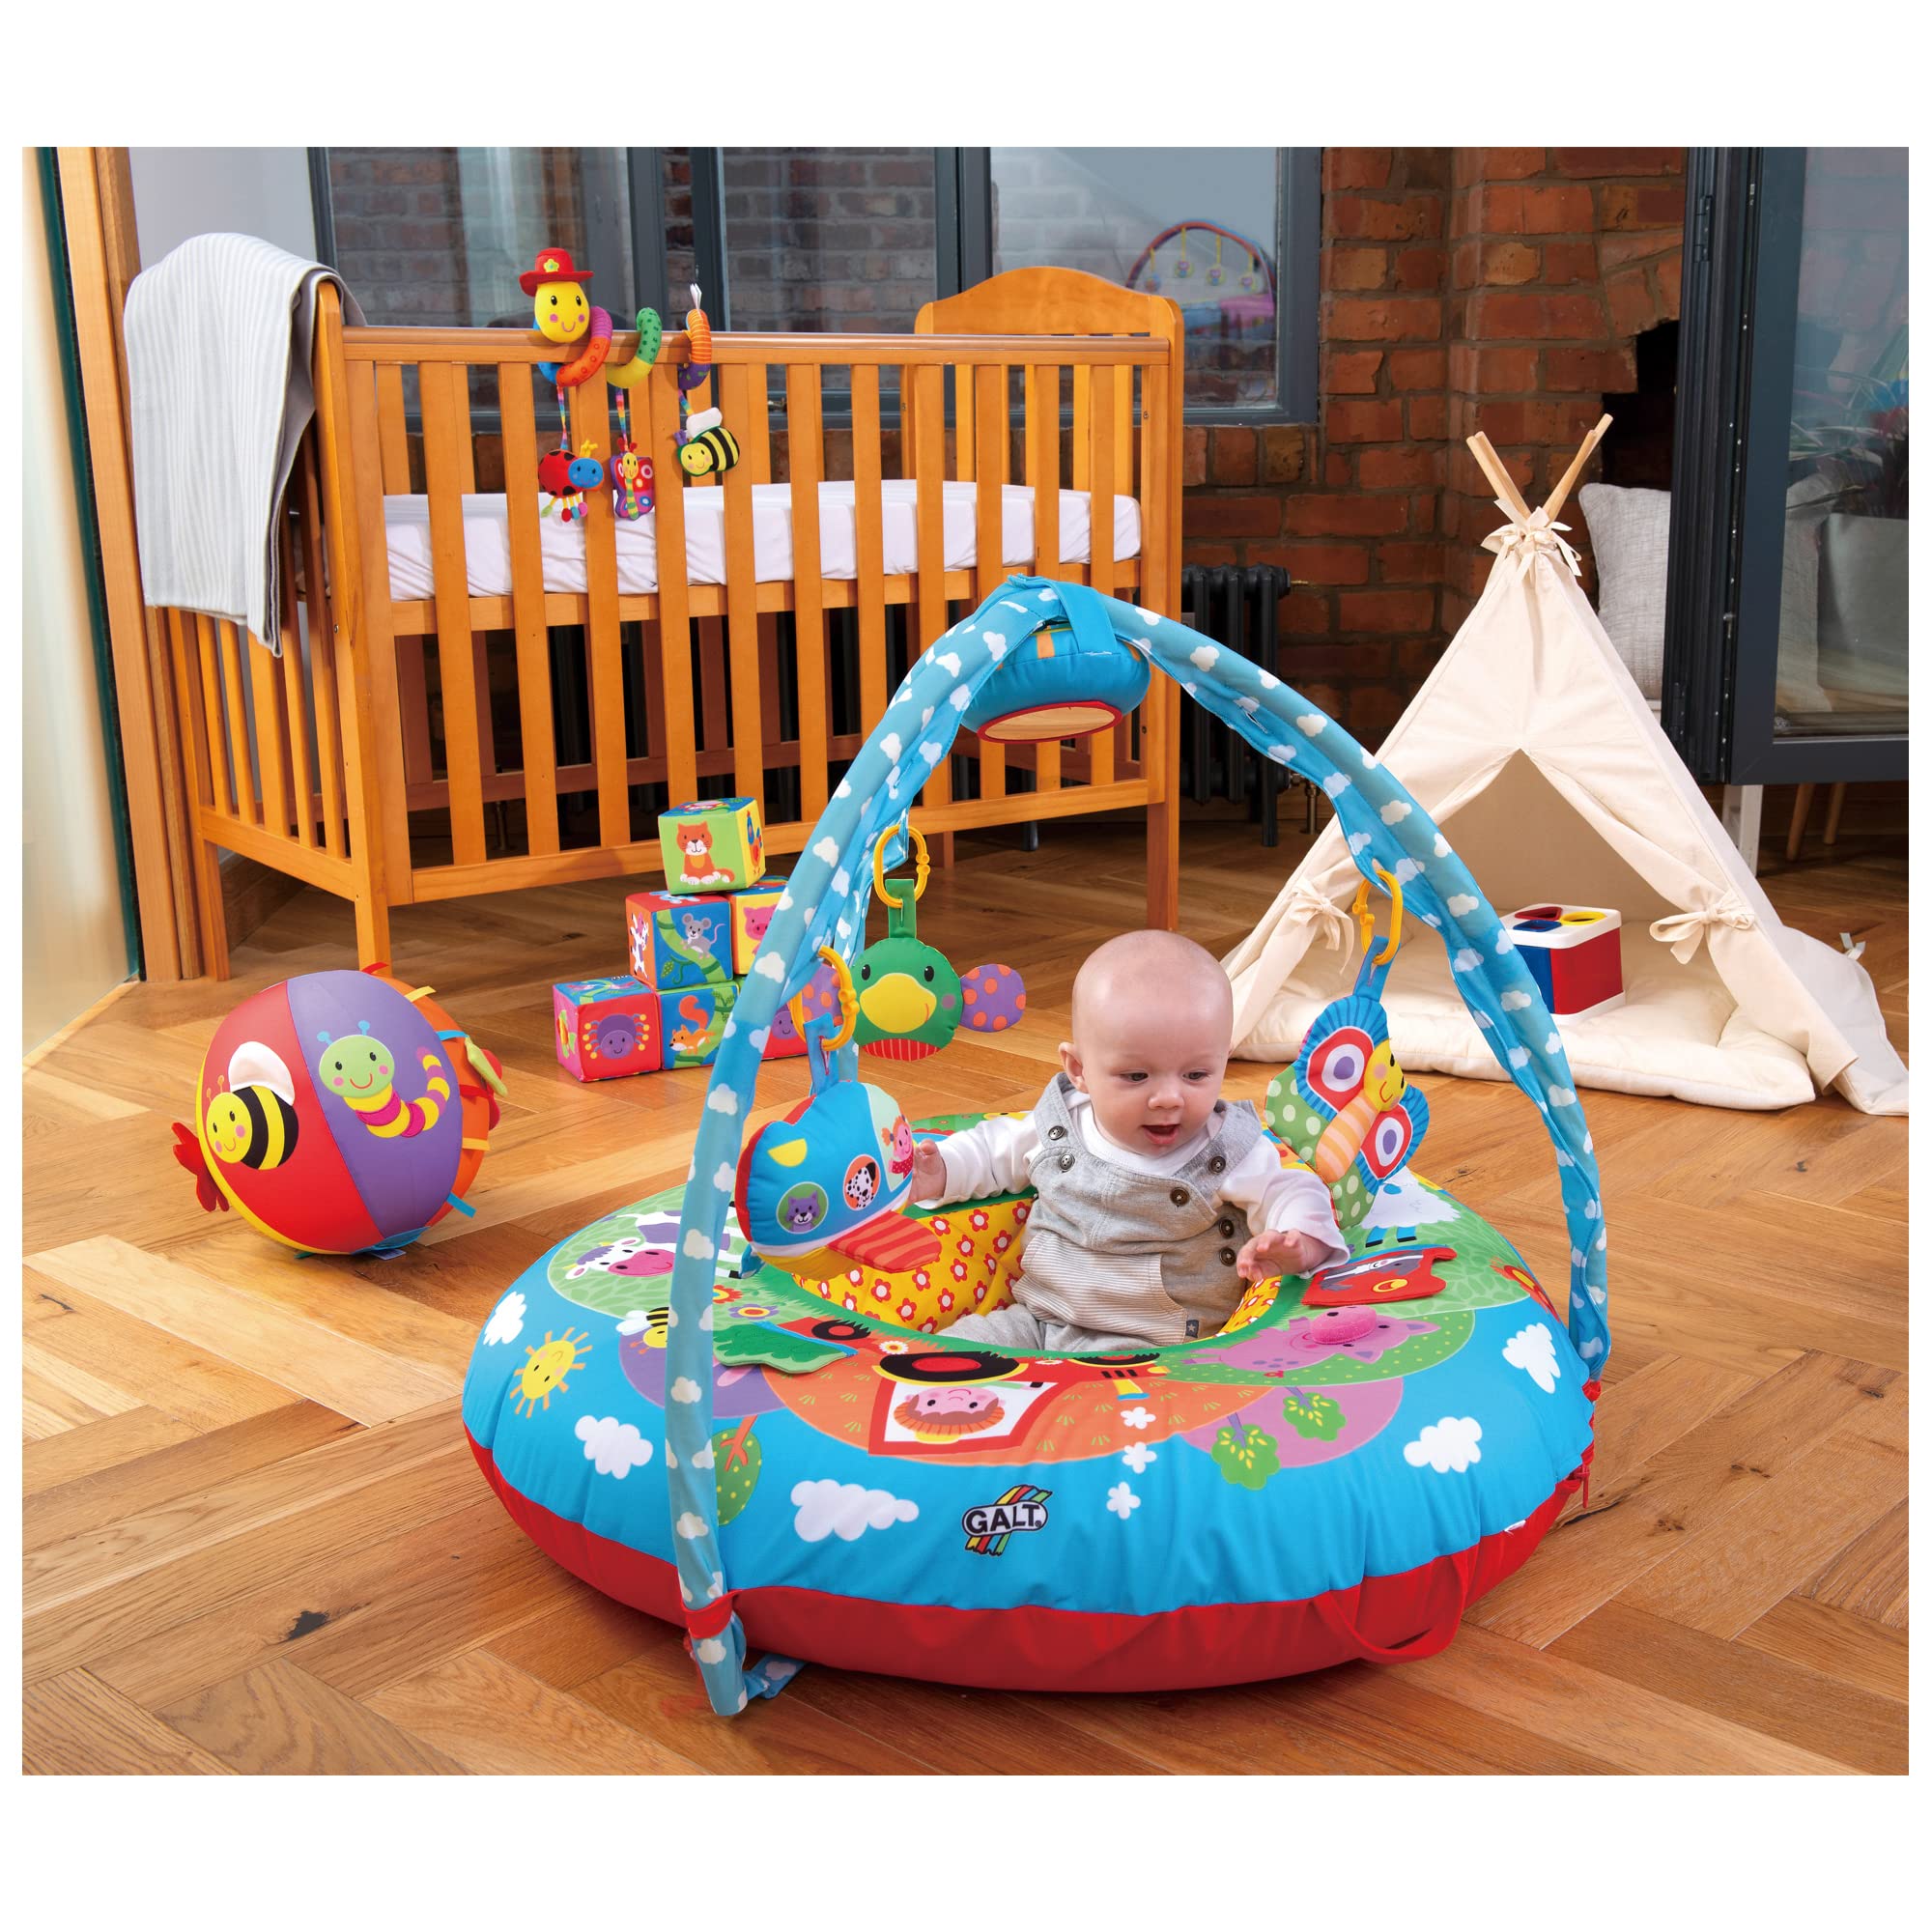 Galt Toys, Playnest & Gym - Farm, Baby Activity Center & Floor Seat, includes 1 x Inflatable ring